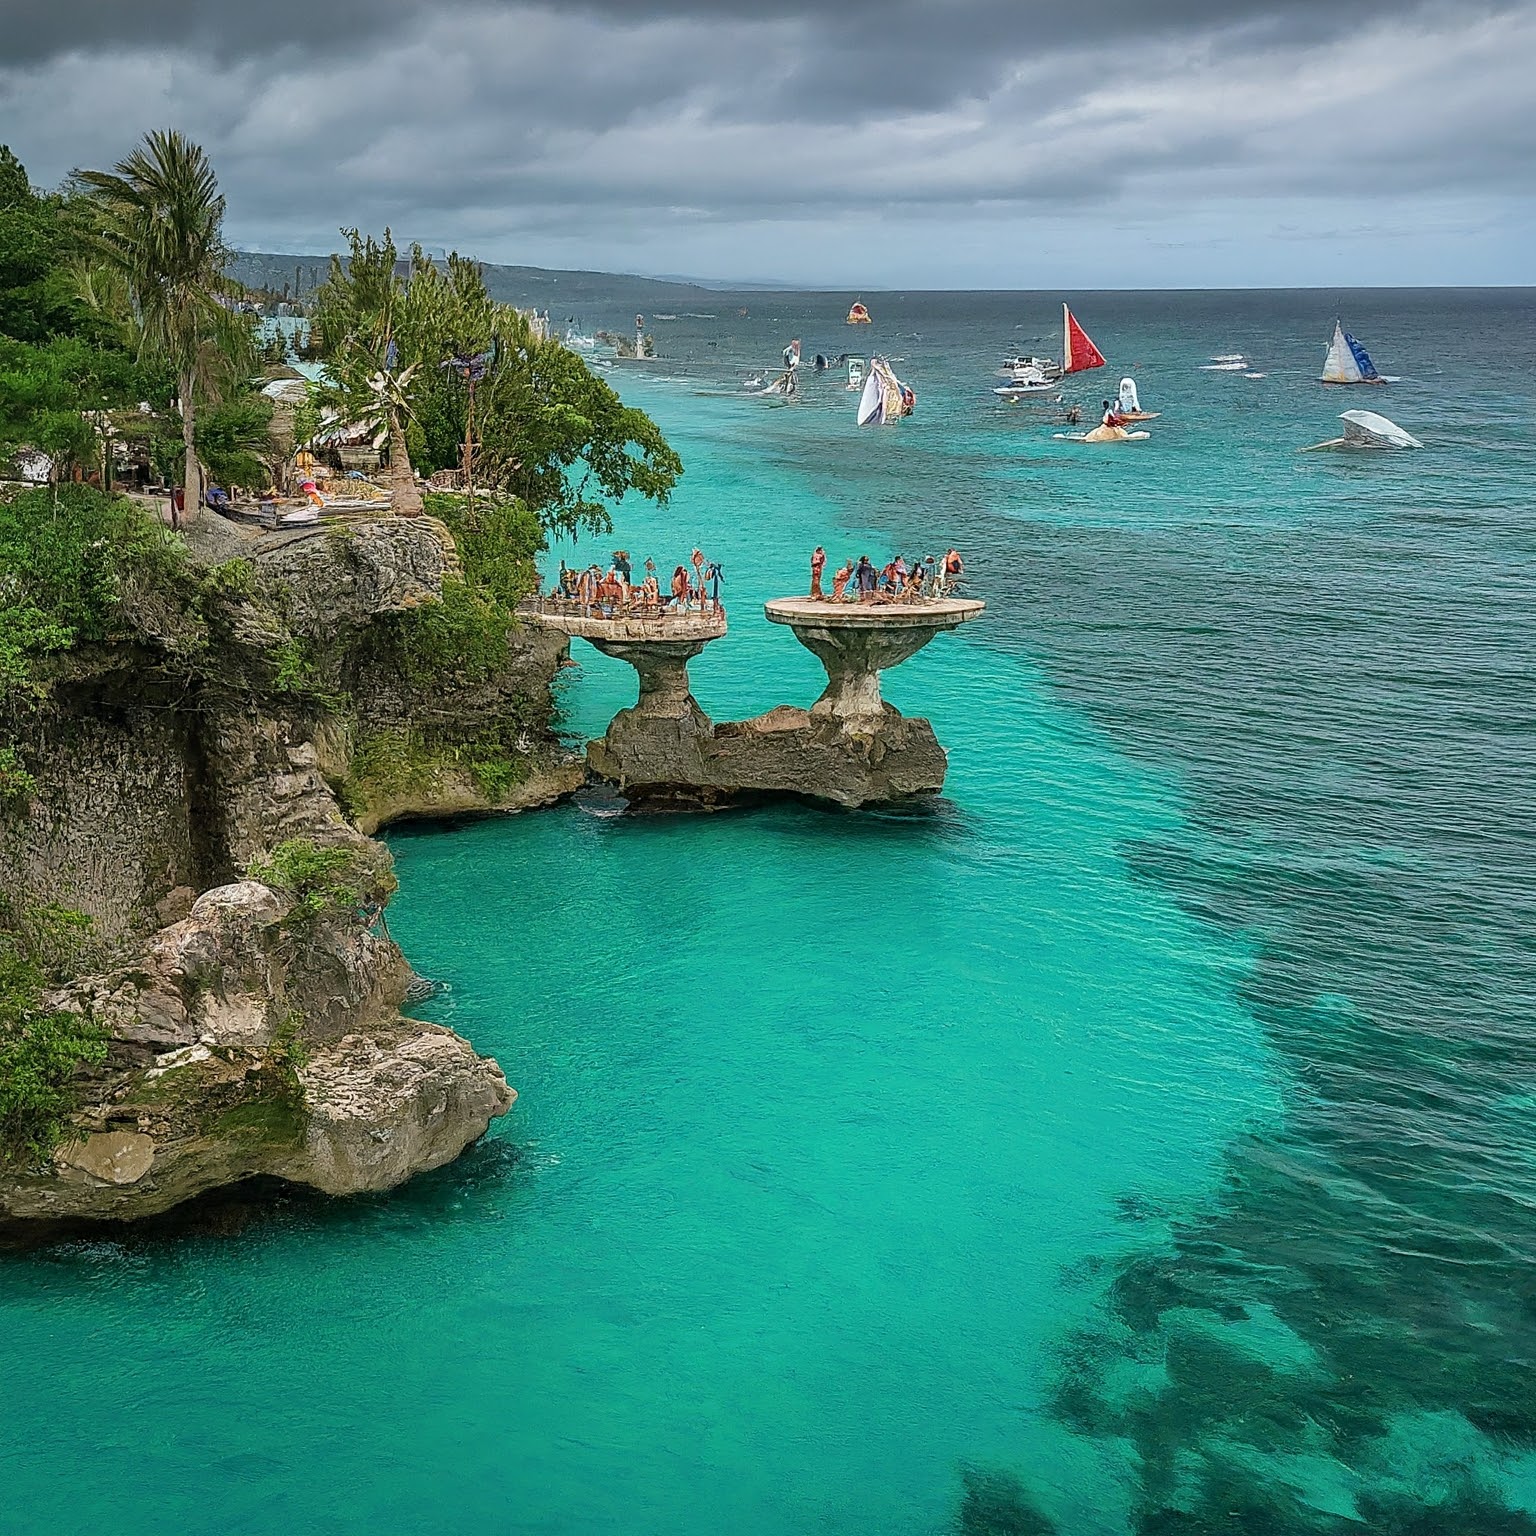 Boracay Island, Philippines: Cliff diving platform at Ariel's Point with divers and turquoise water.